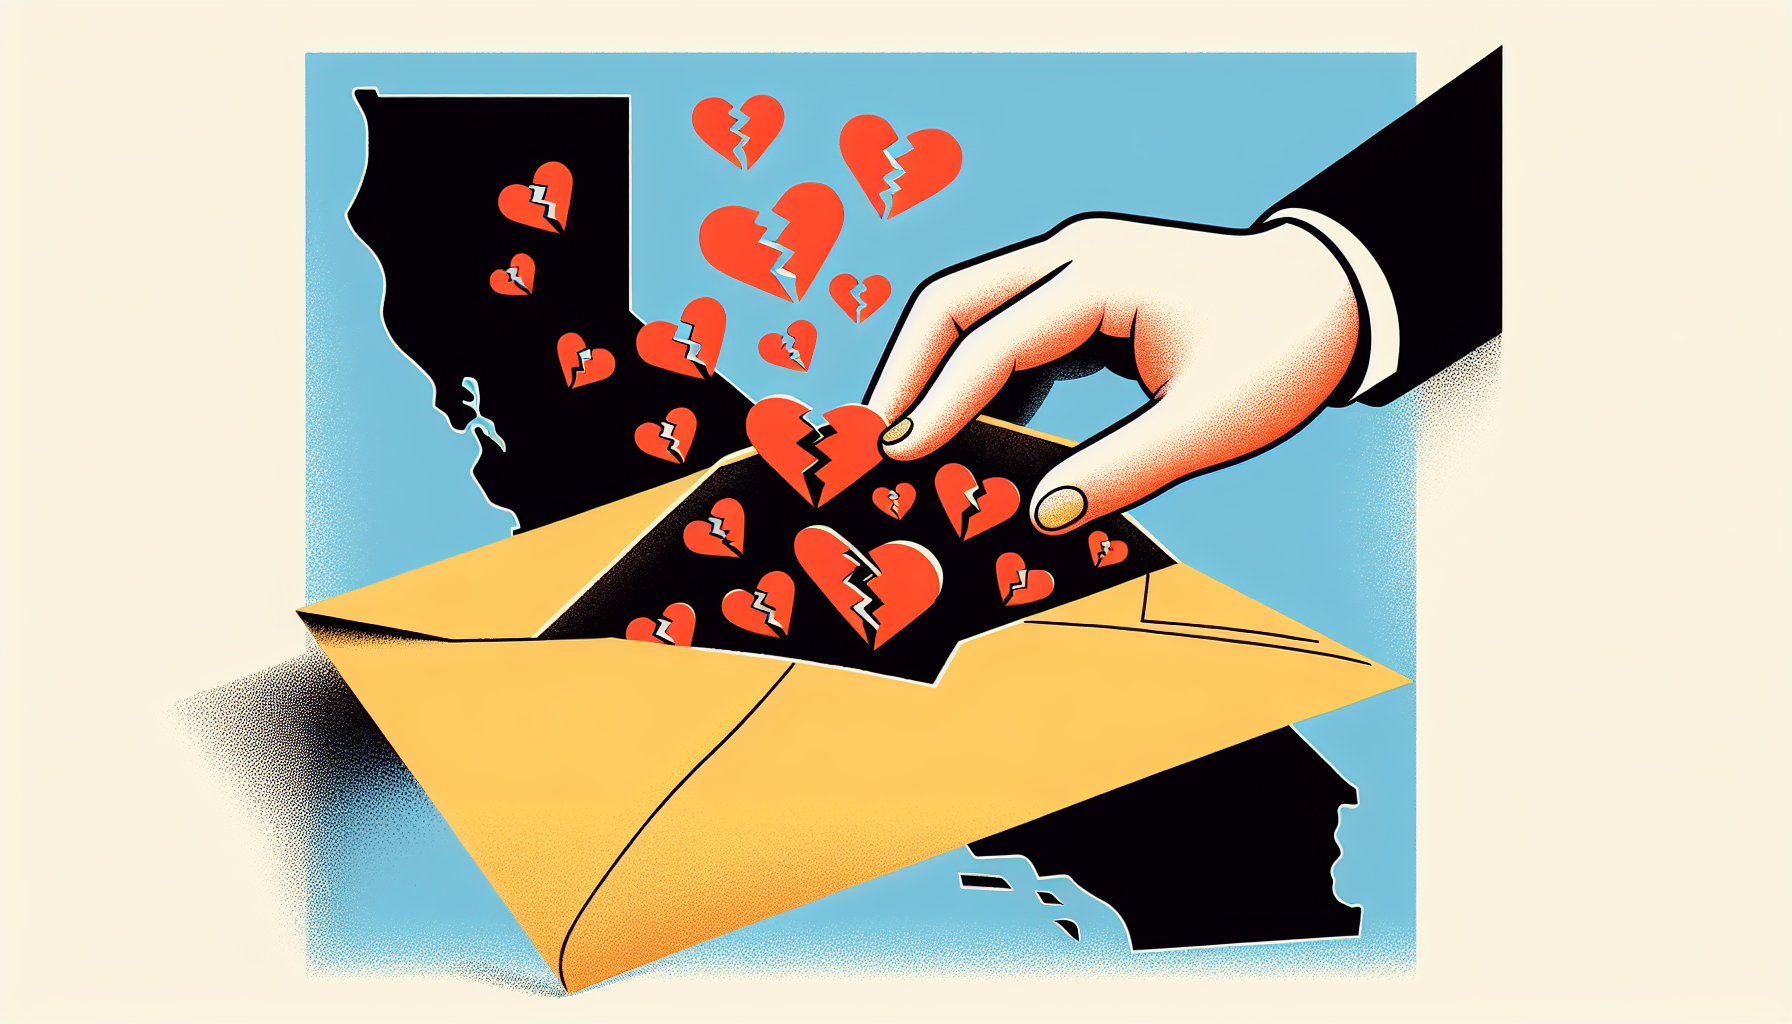 Illustration of legal documents representing California's no-fault divorce system